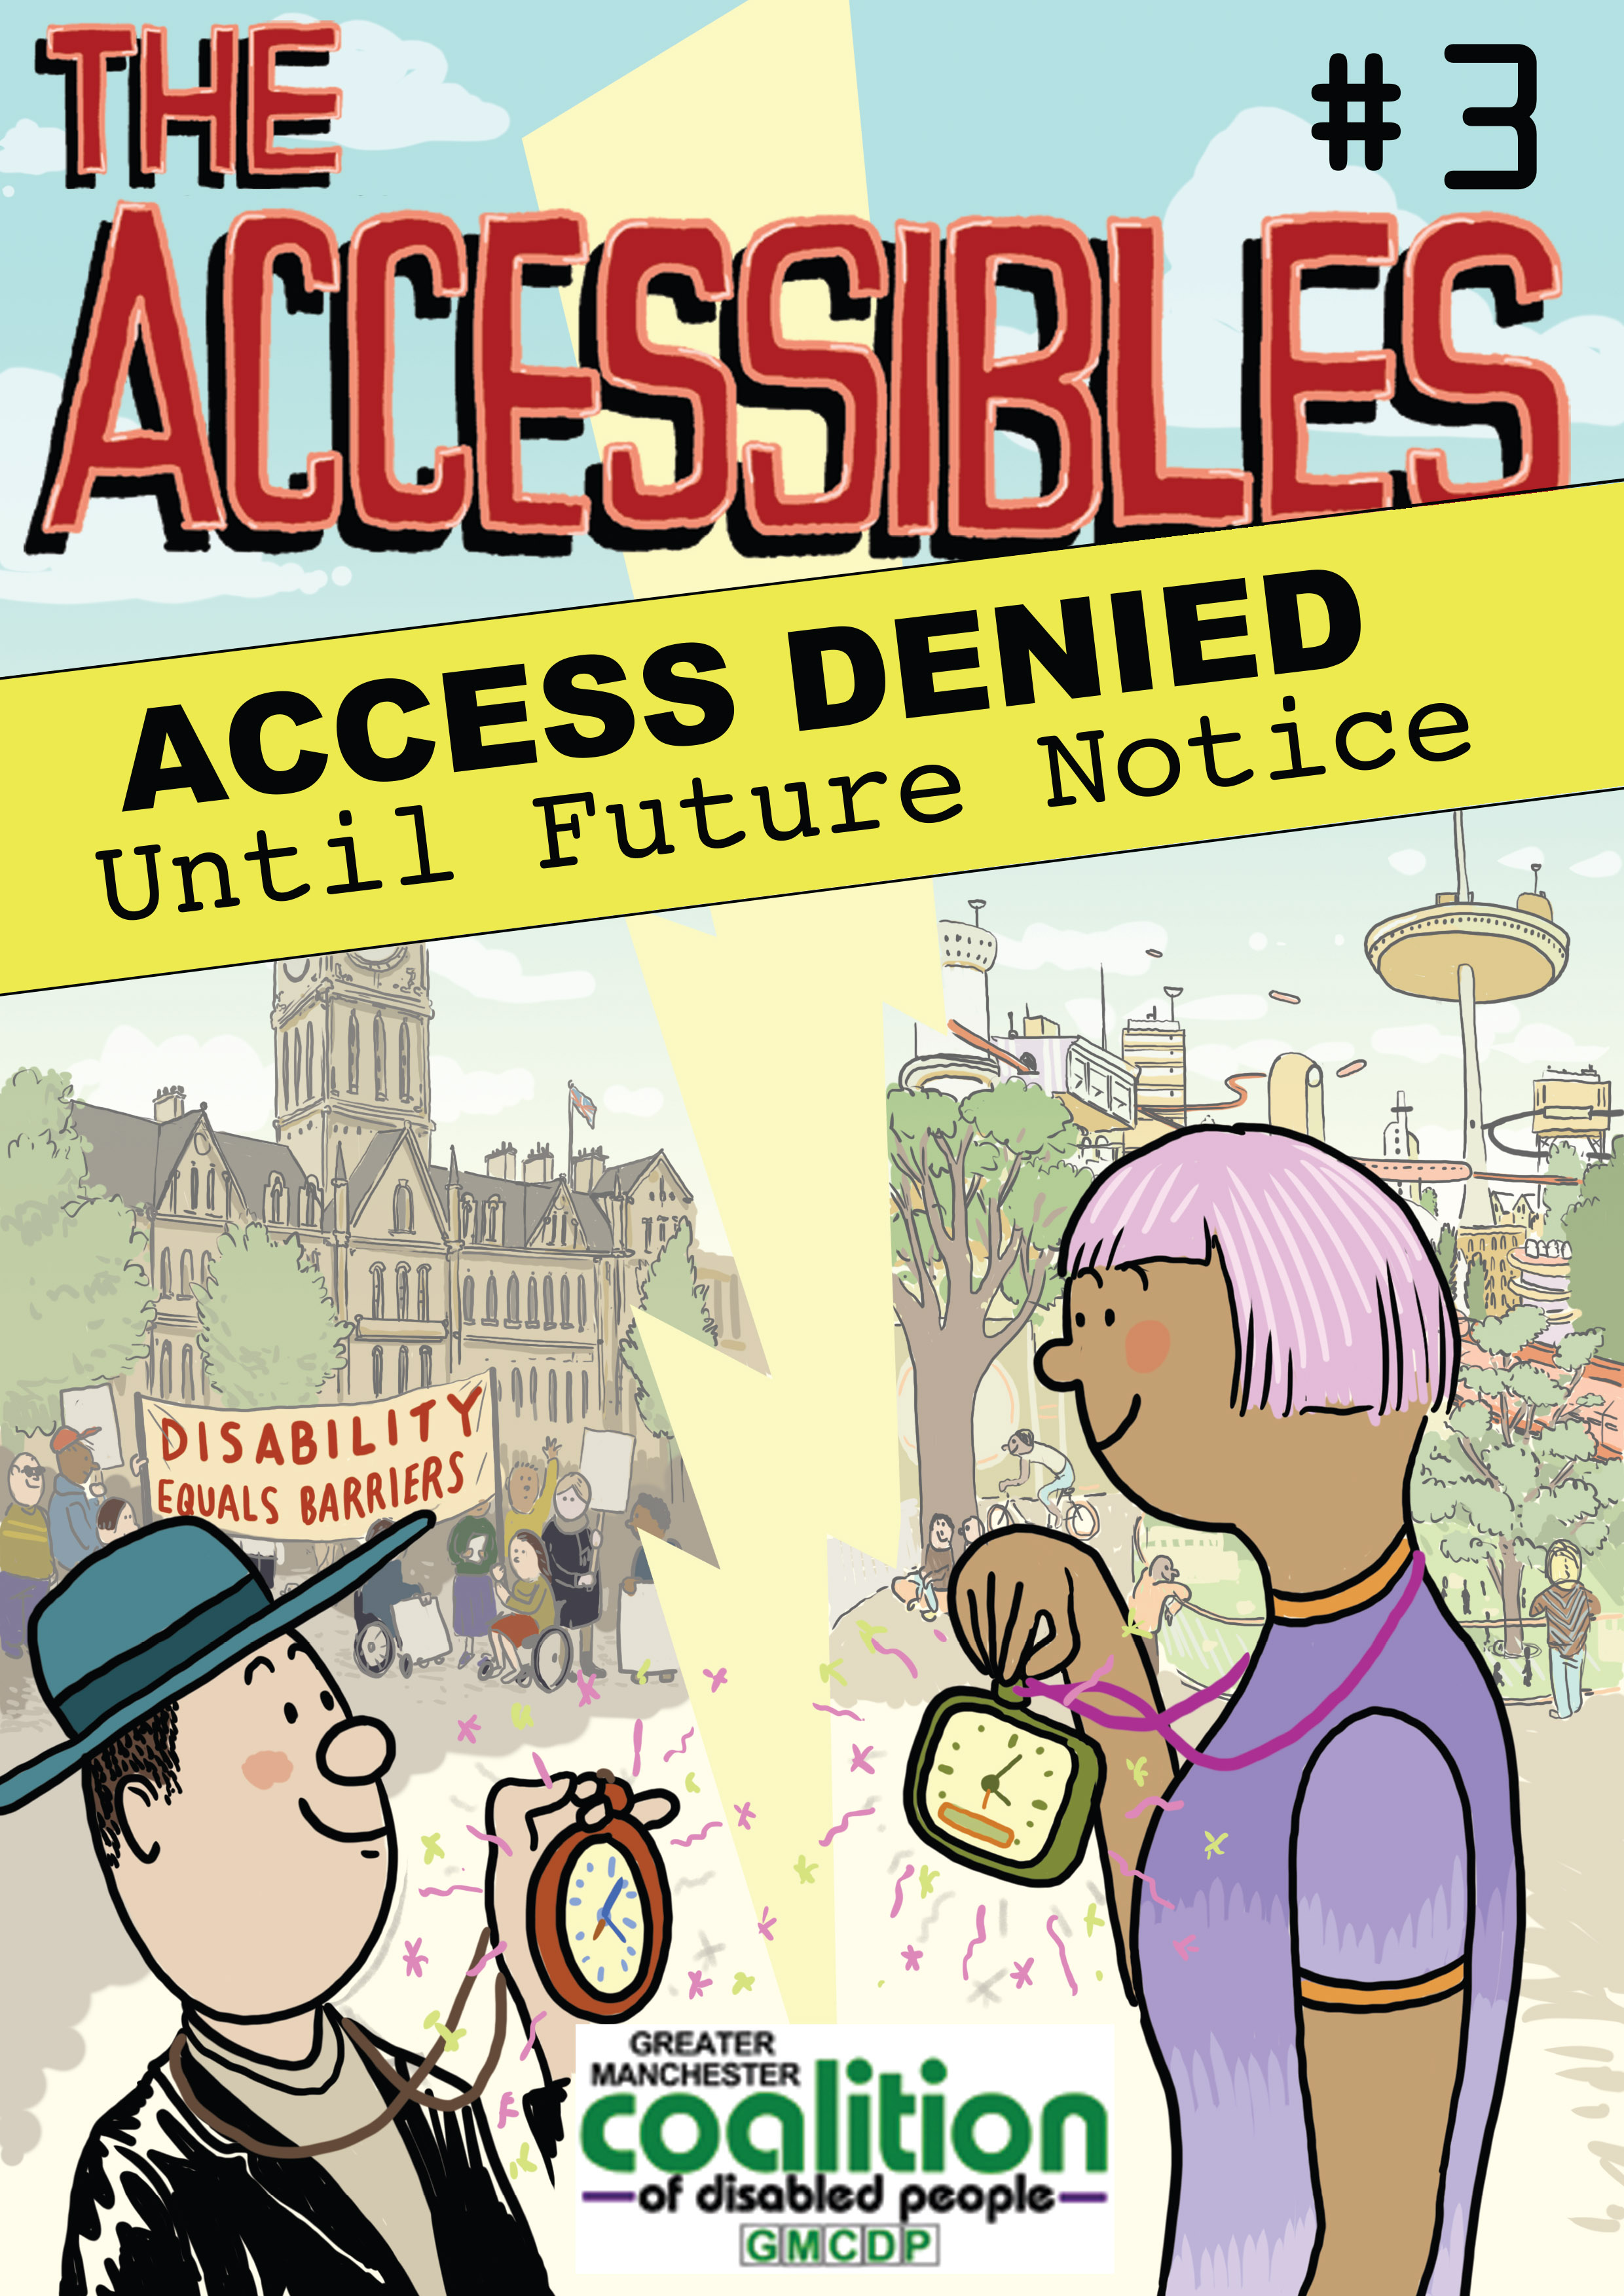 The Accessibles issue 3 cover